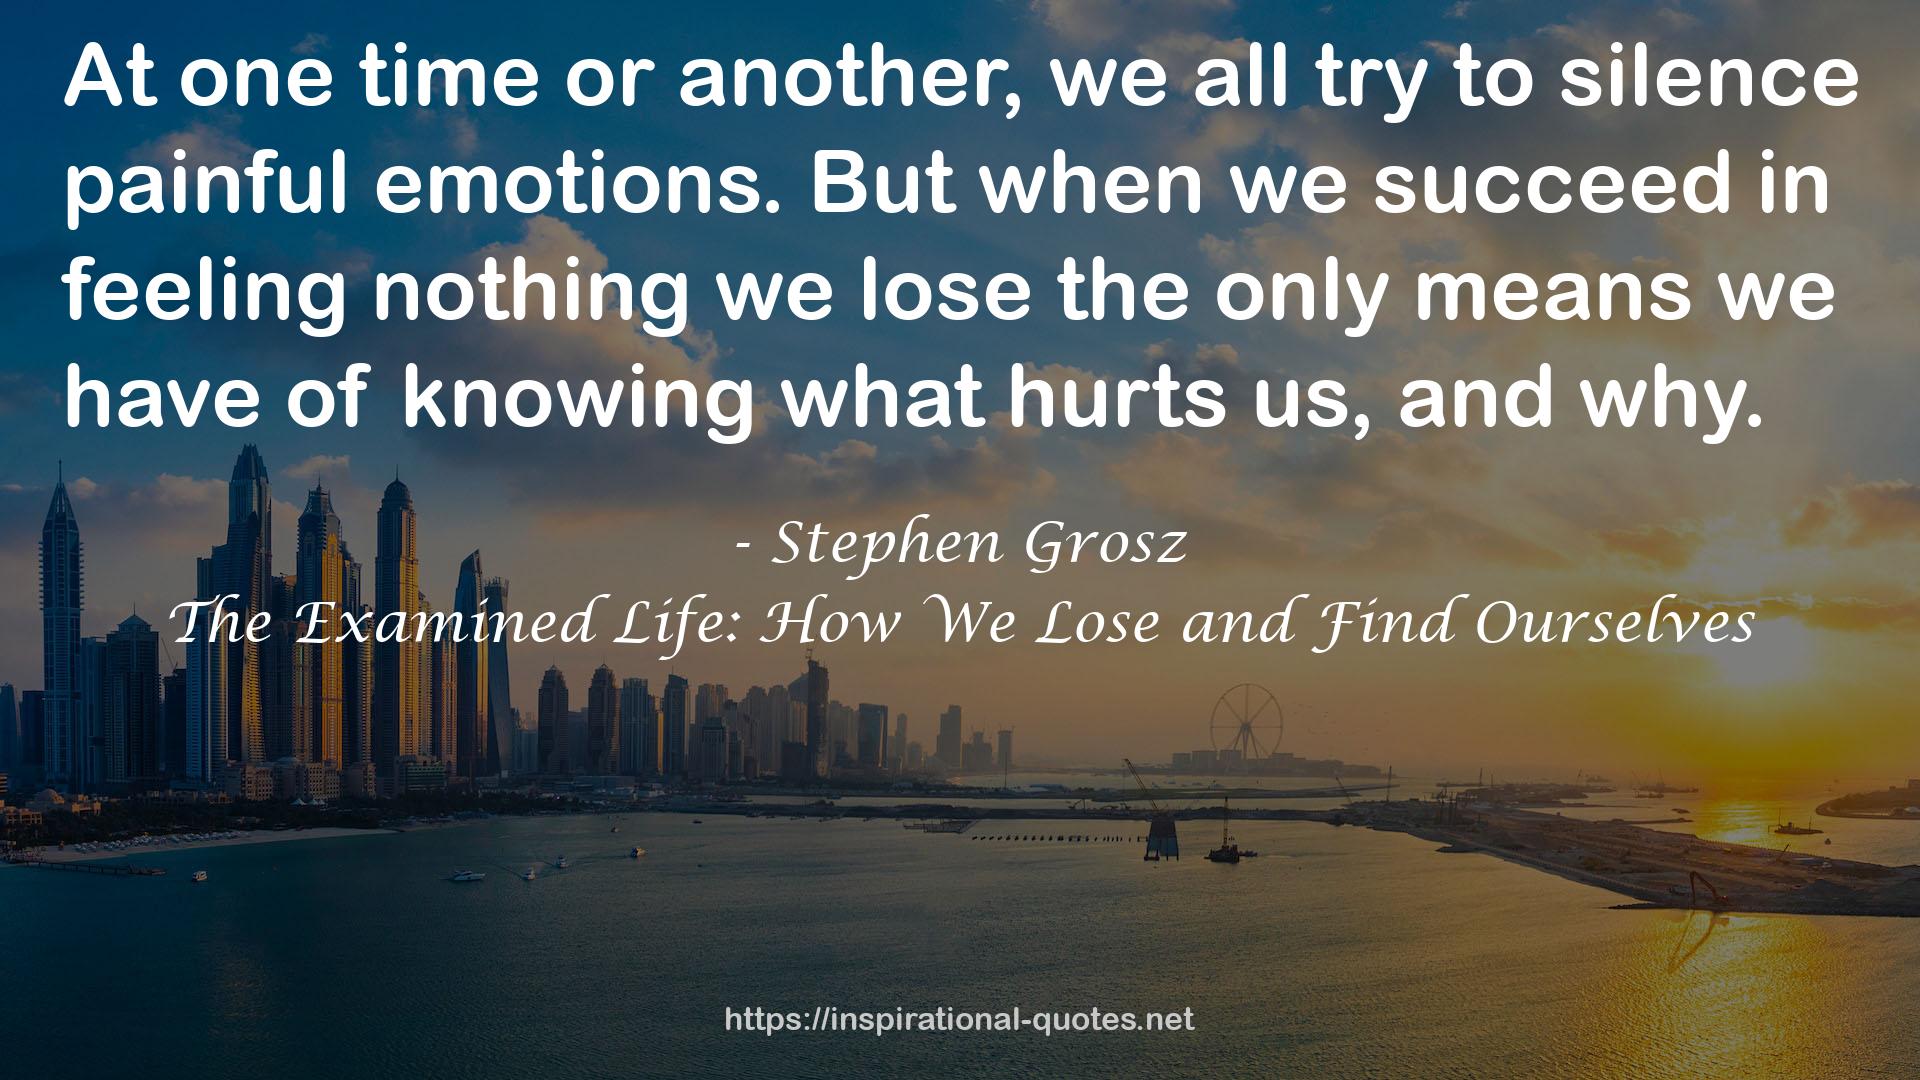 The Examined Life: How We Lose and Find Ourselves QUOTES